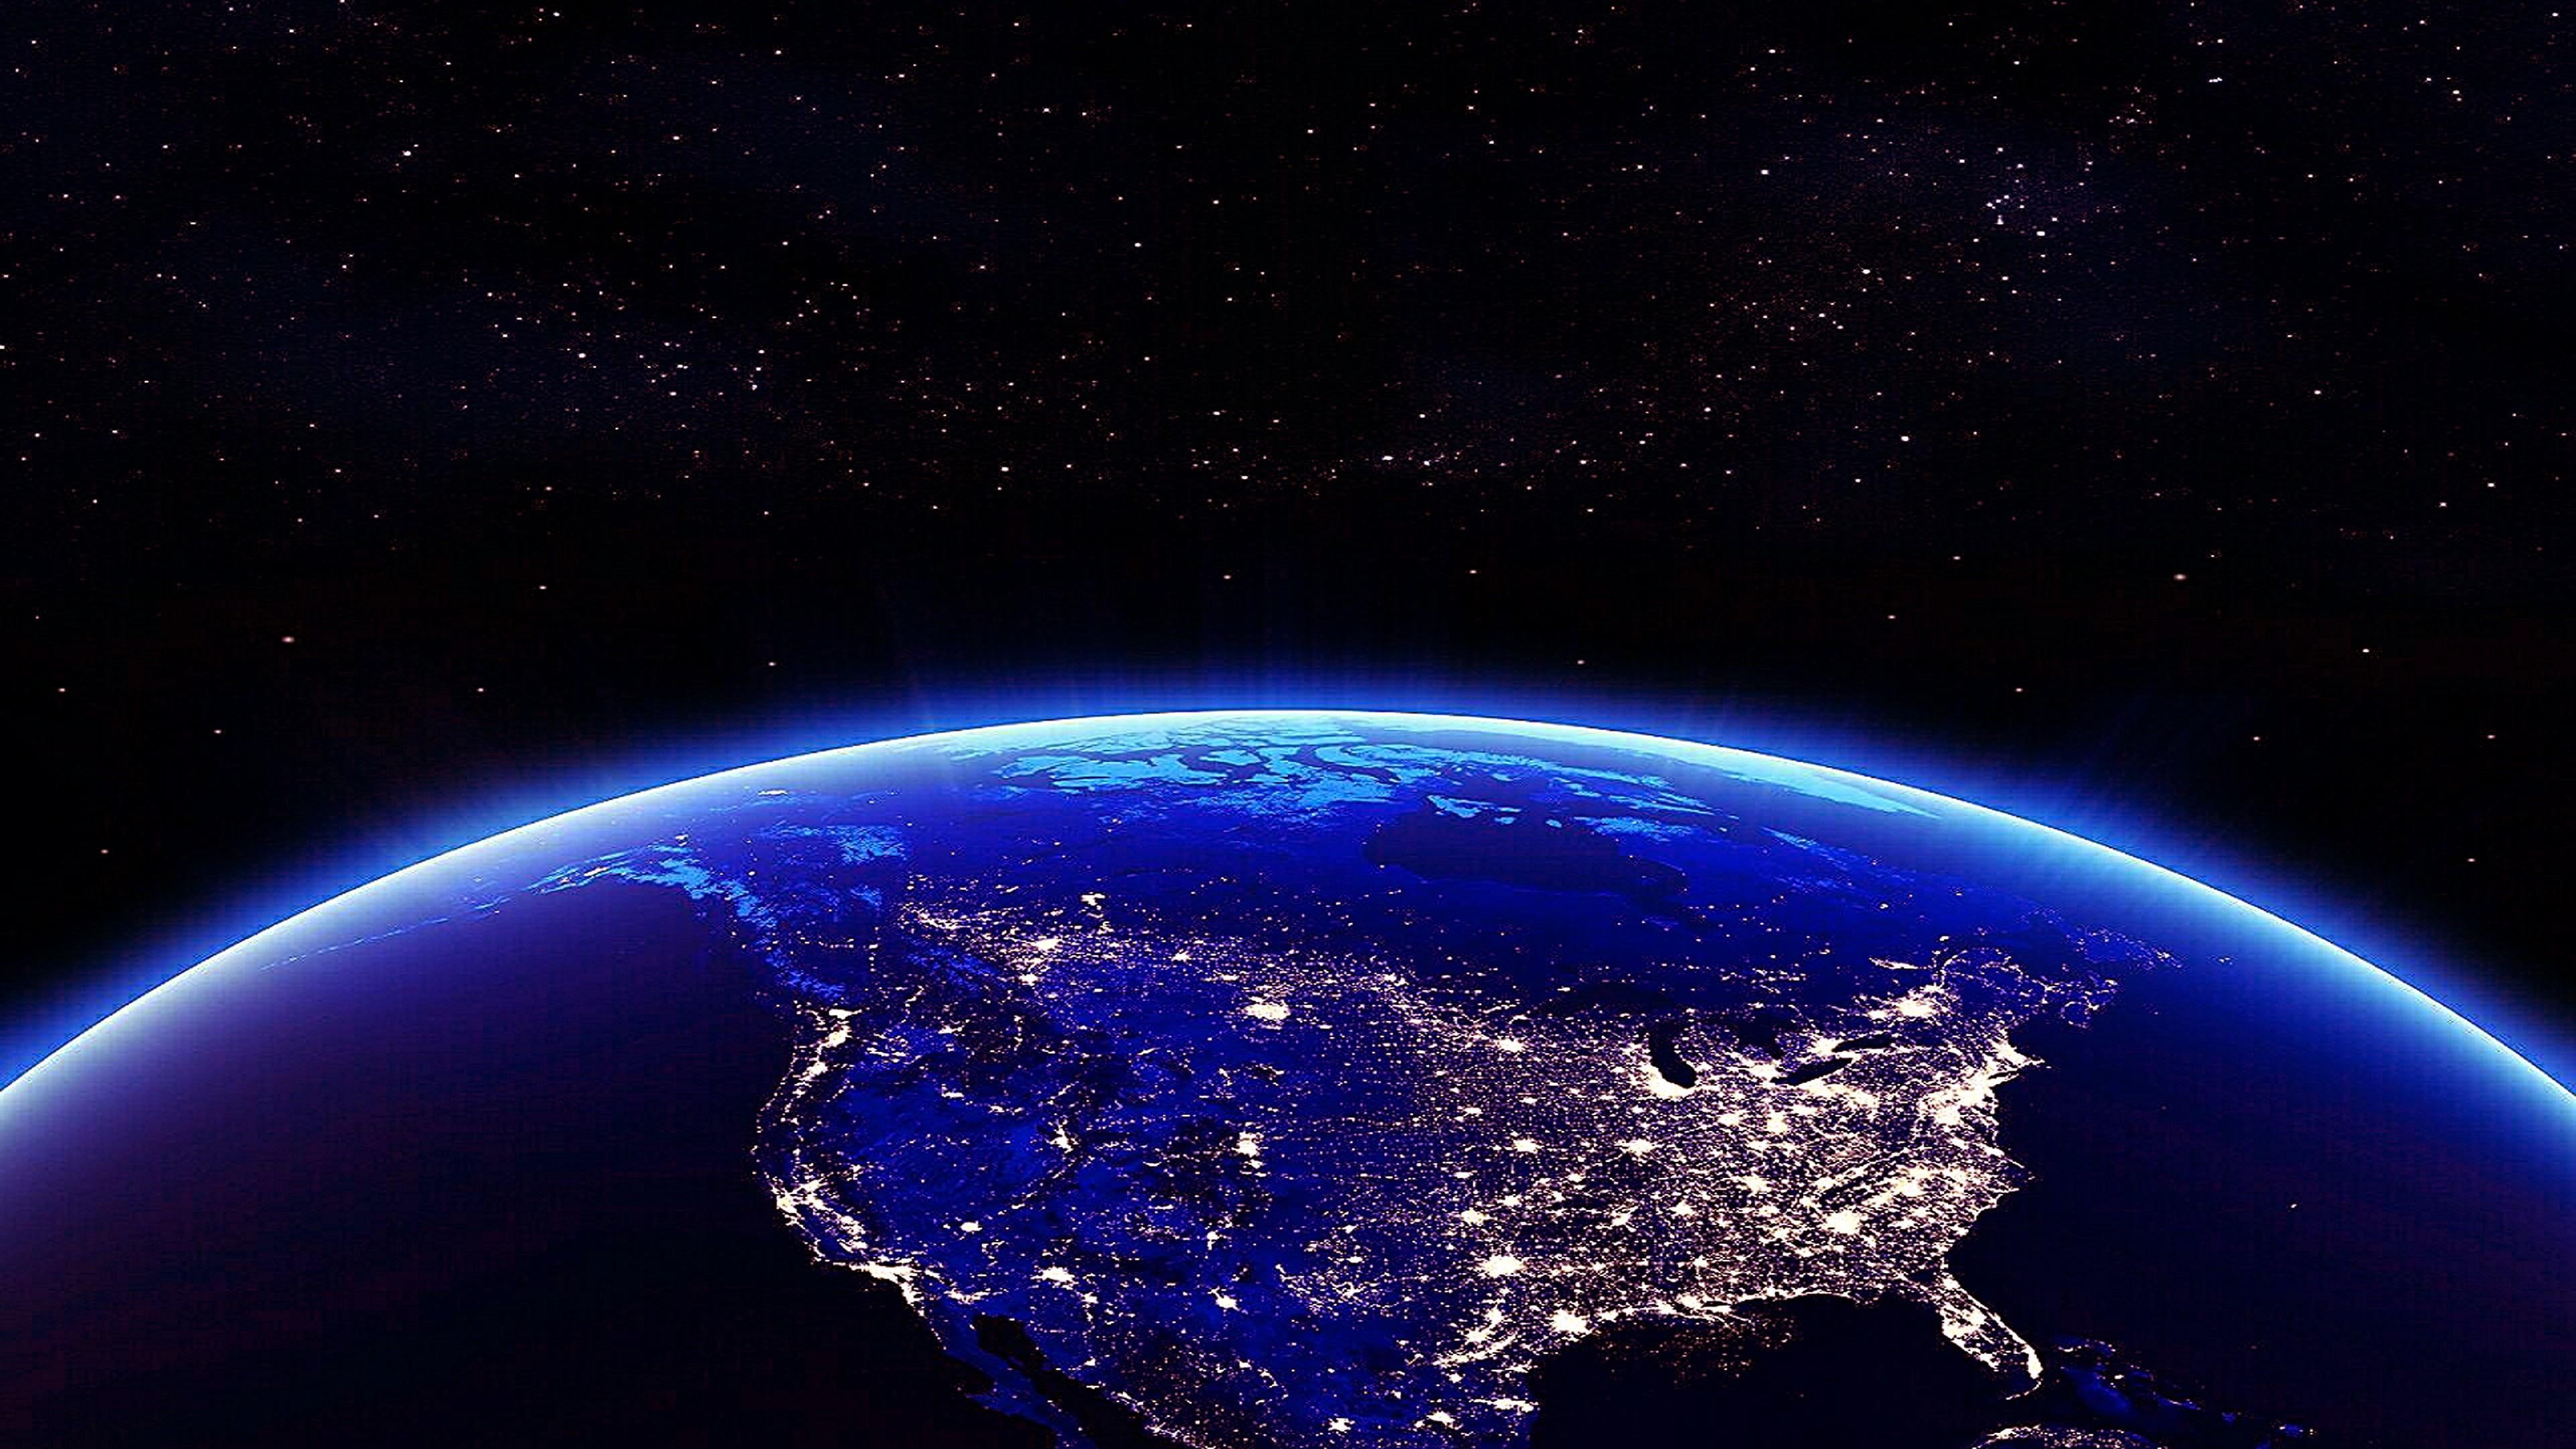 earth in night from space